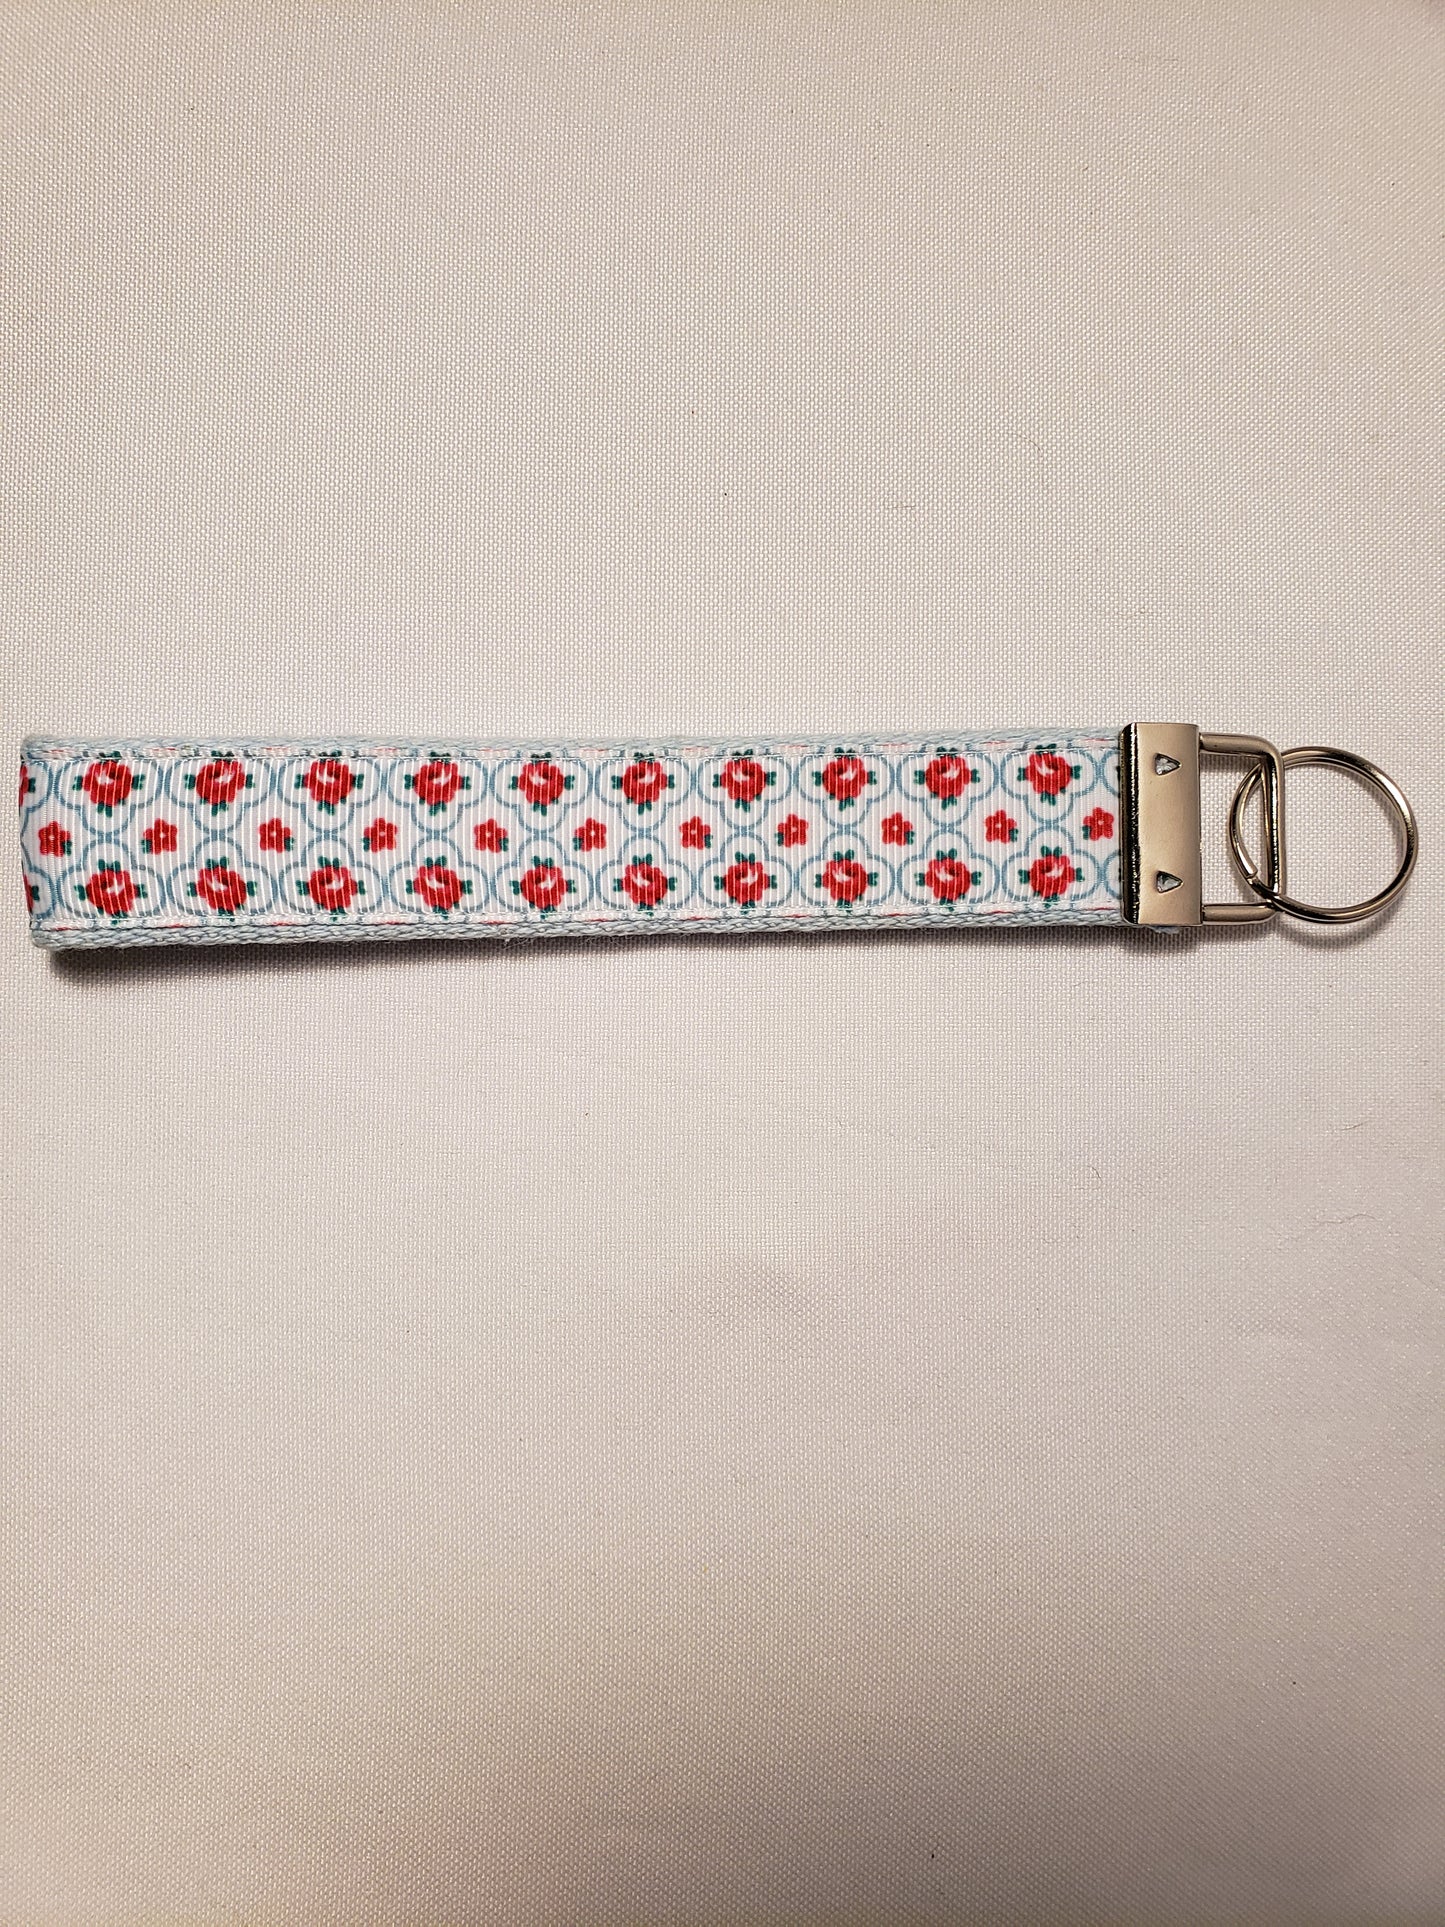 Country French Red Rose Key Fob